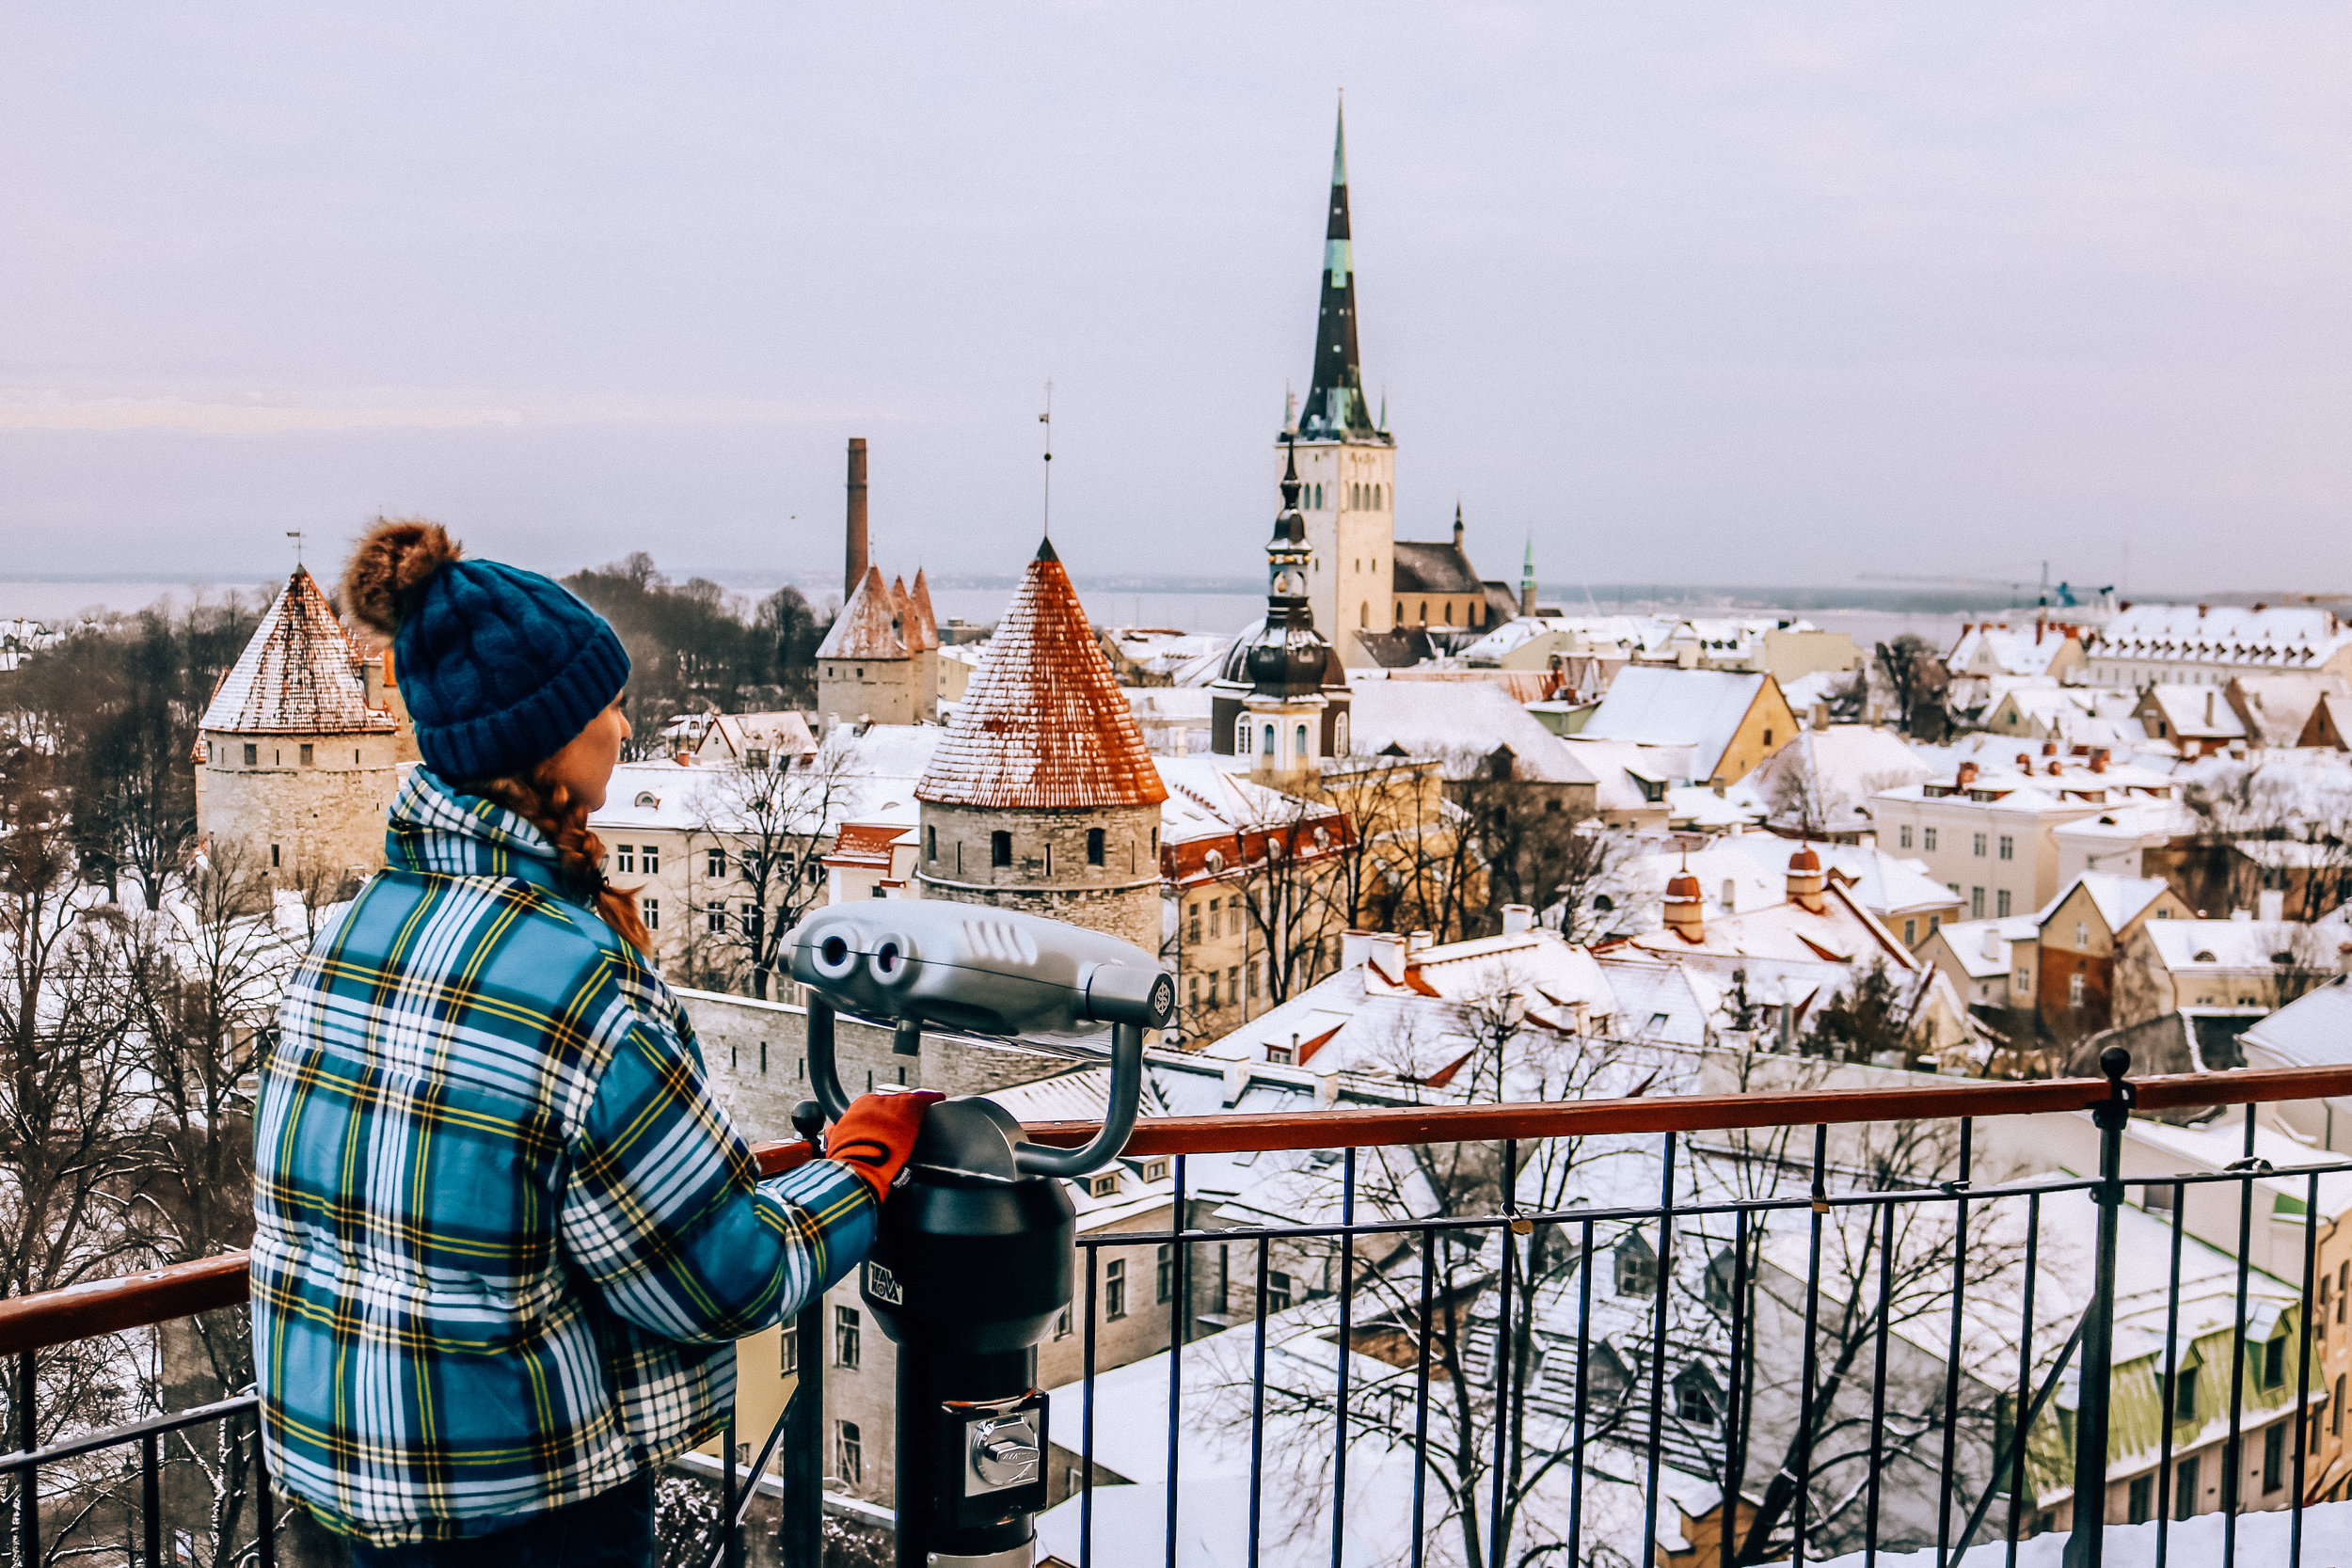 A complete weekend guide to Tallinn, Estonia - what to see and do, where to eat and tips for visiting the best Christmas market in Europe | A Weekend in Tallinn | Travel Guide - Helena Bradbury | City Guide | Tallinn Estonia | 48 hours in Tallinn | …